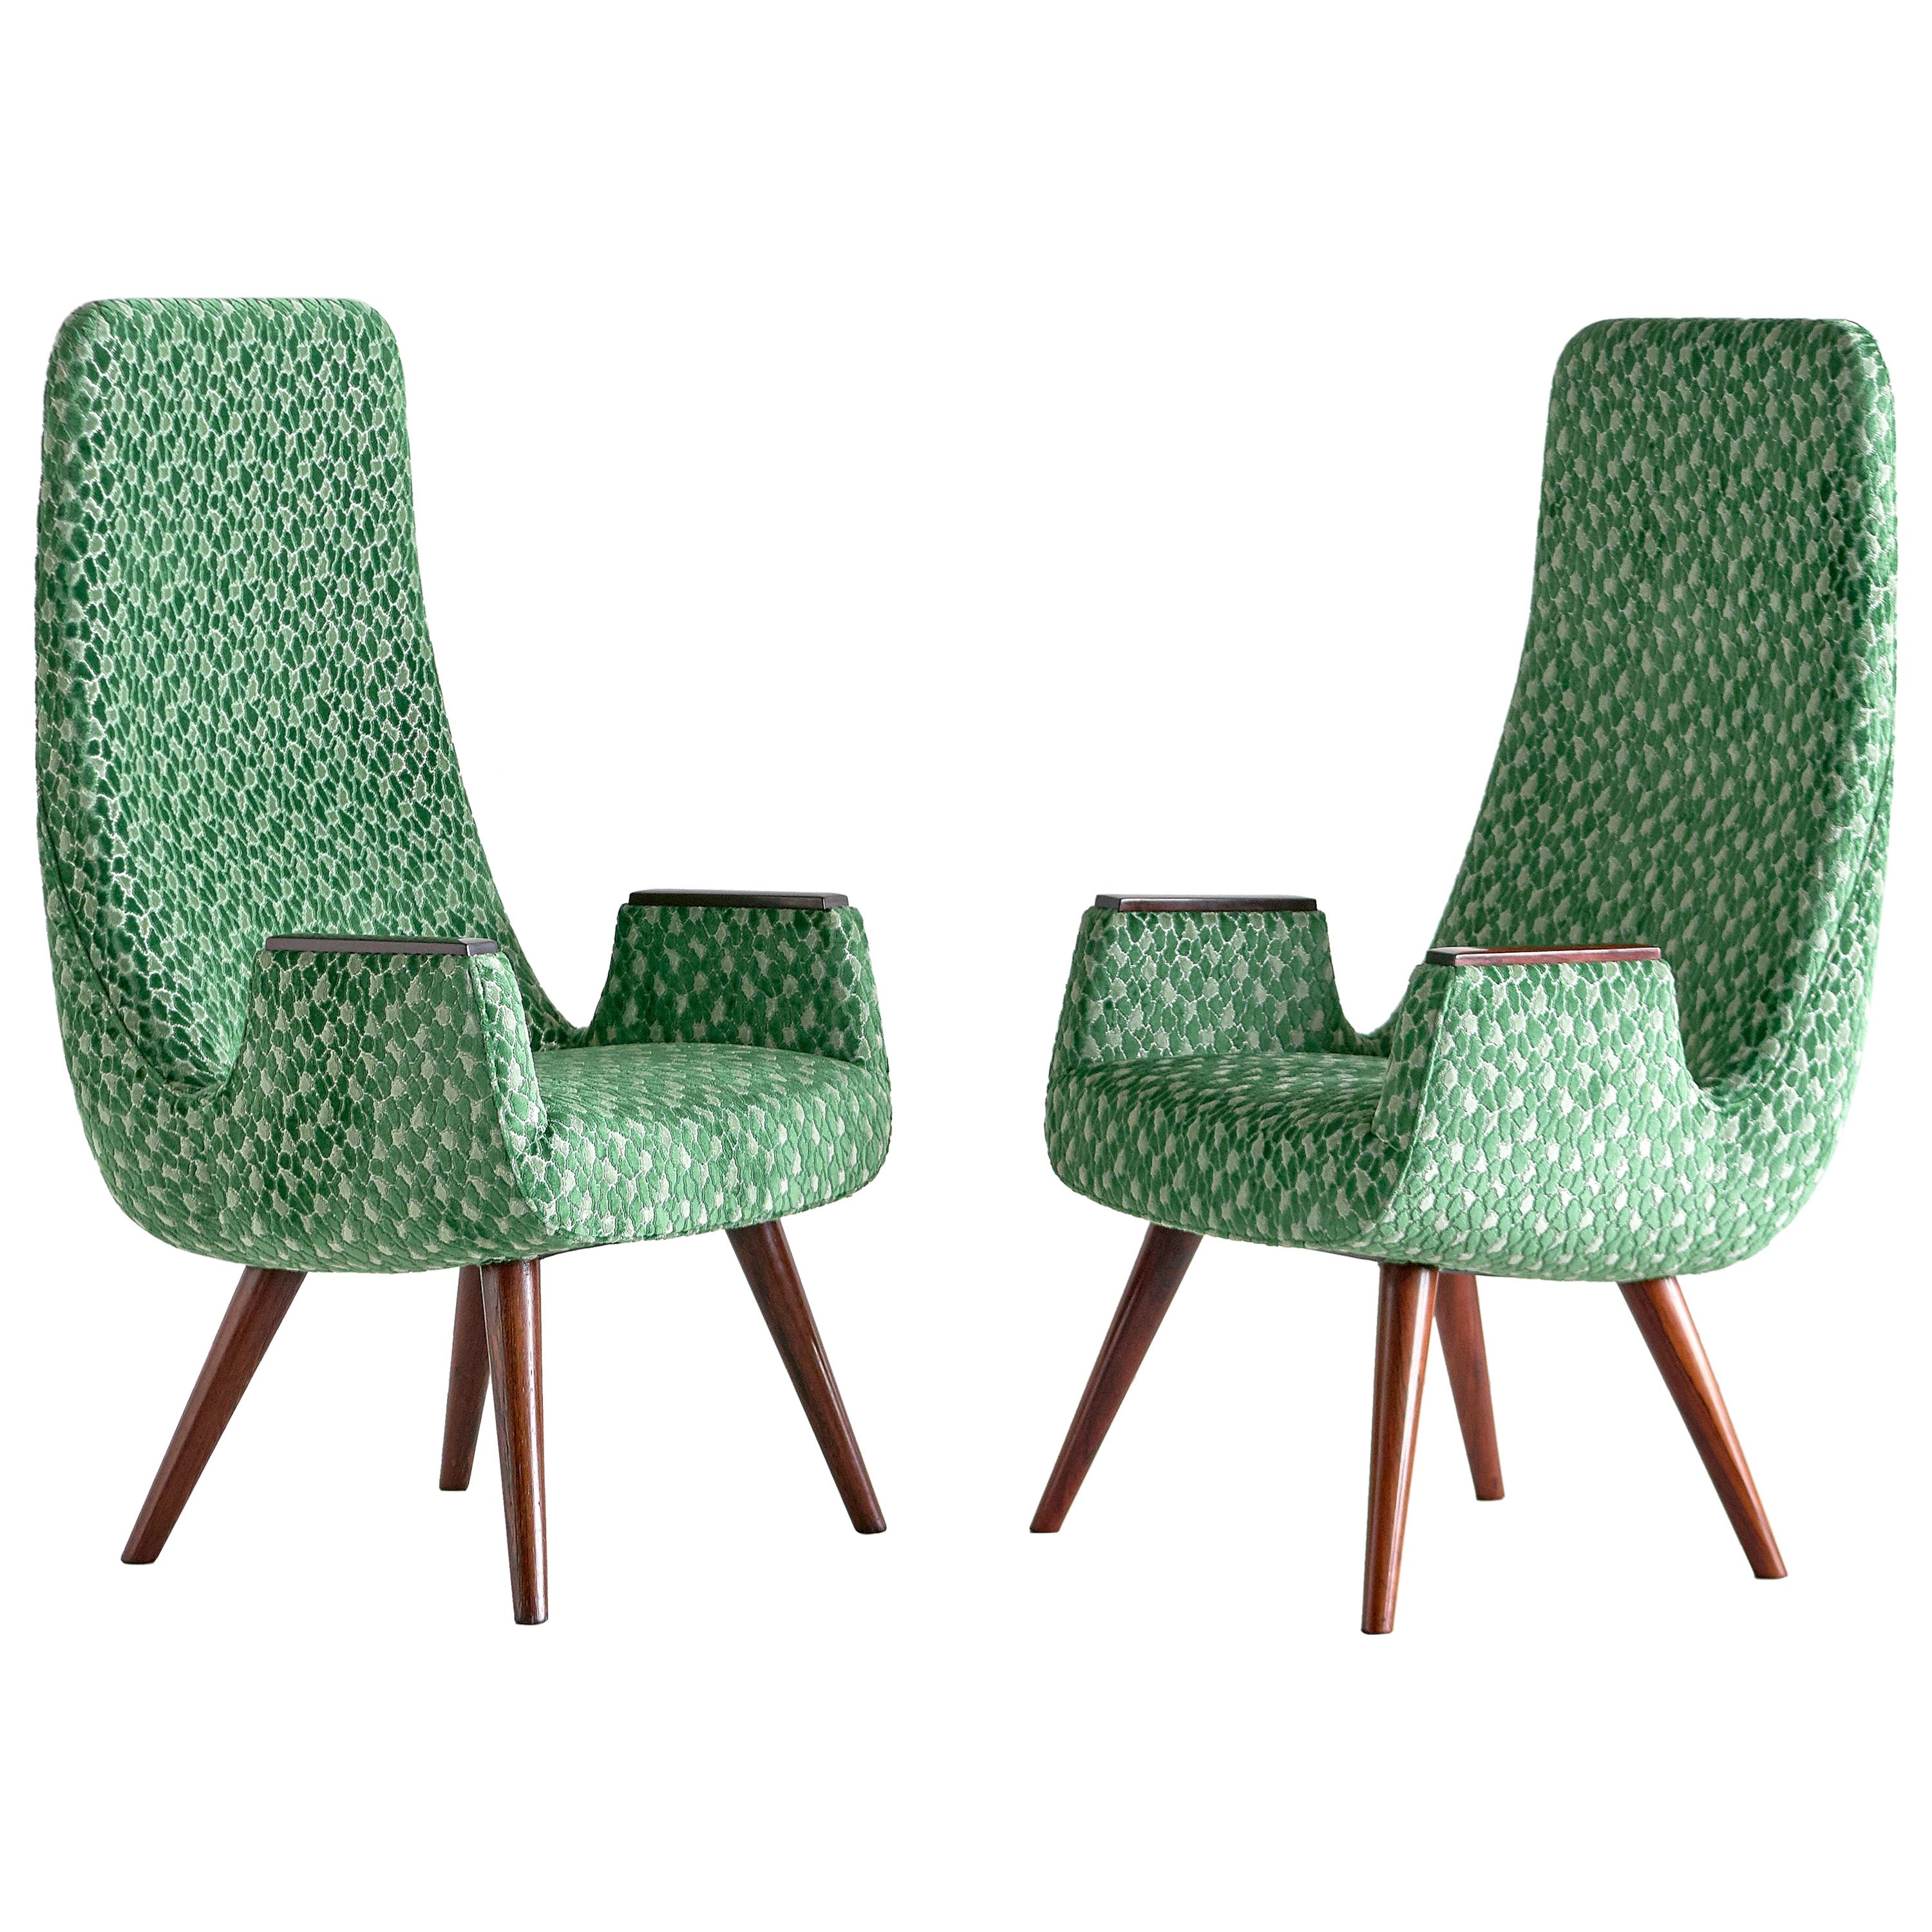 Pair of High Back Armchairs in Green Braquenié Velvet and Wengé Wood, 1950s For Sale